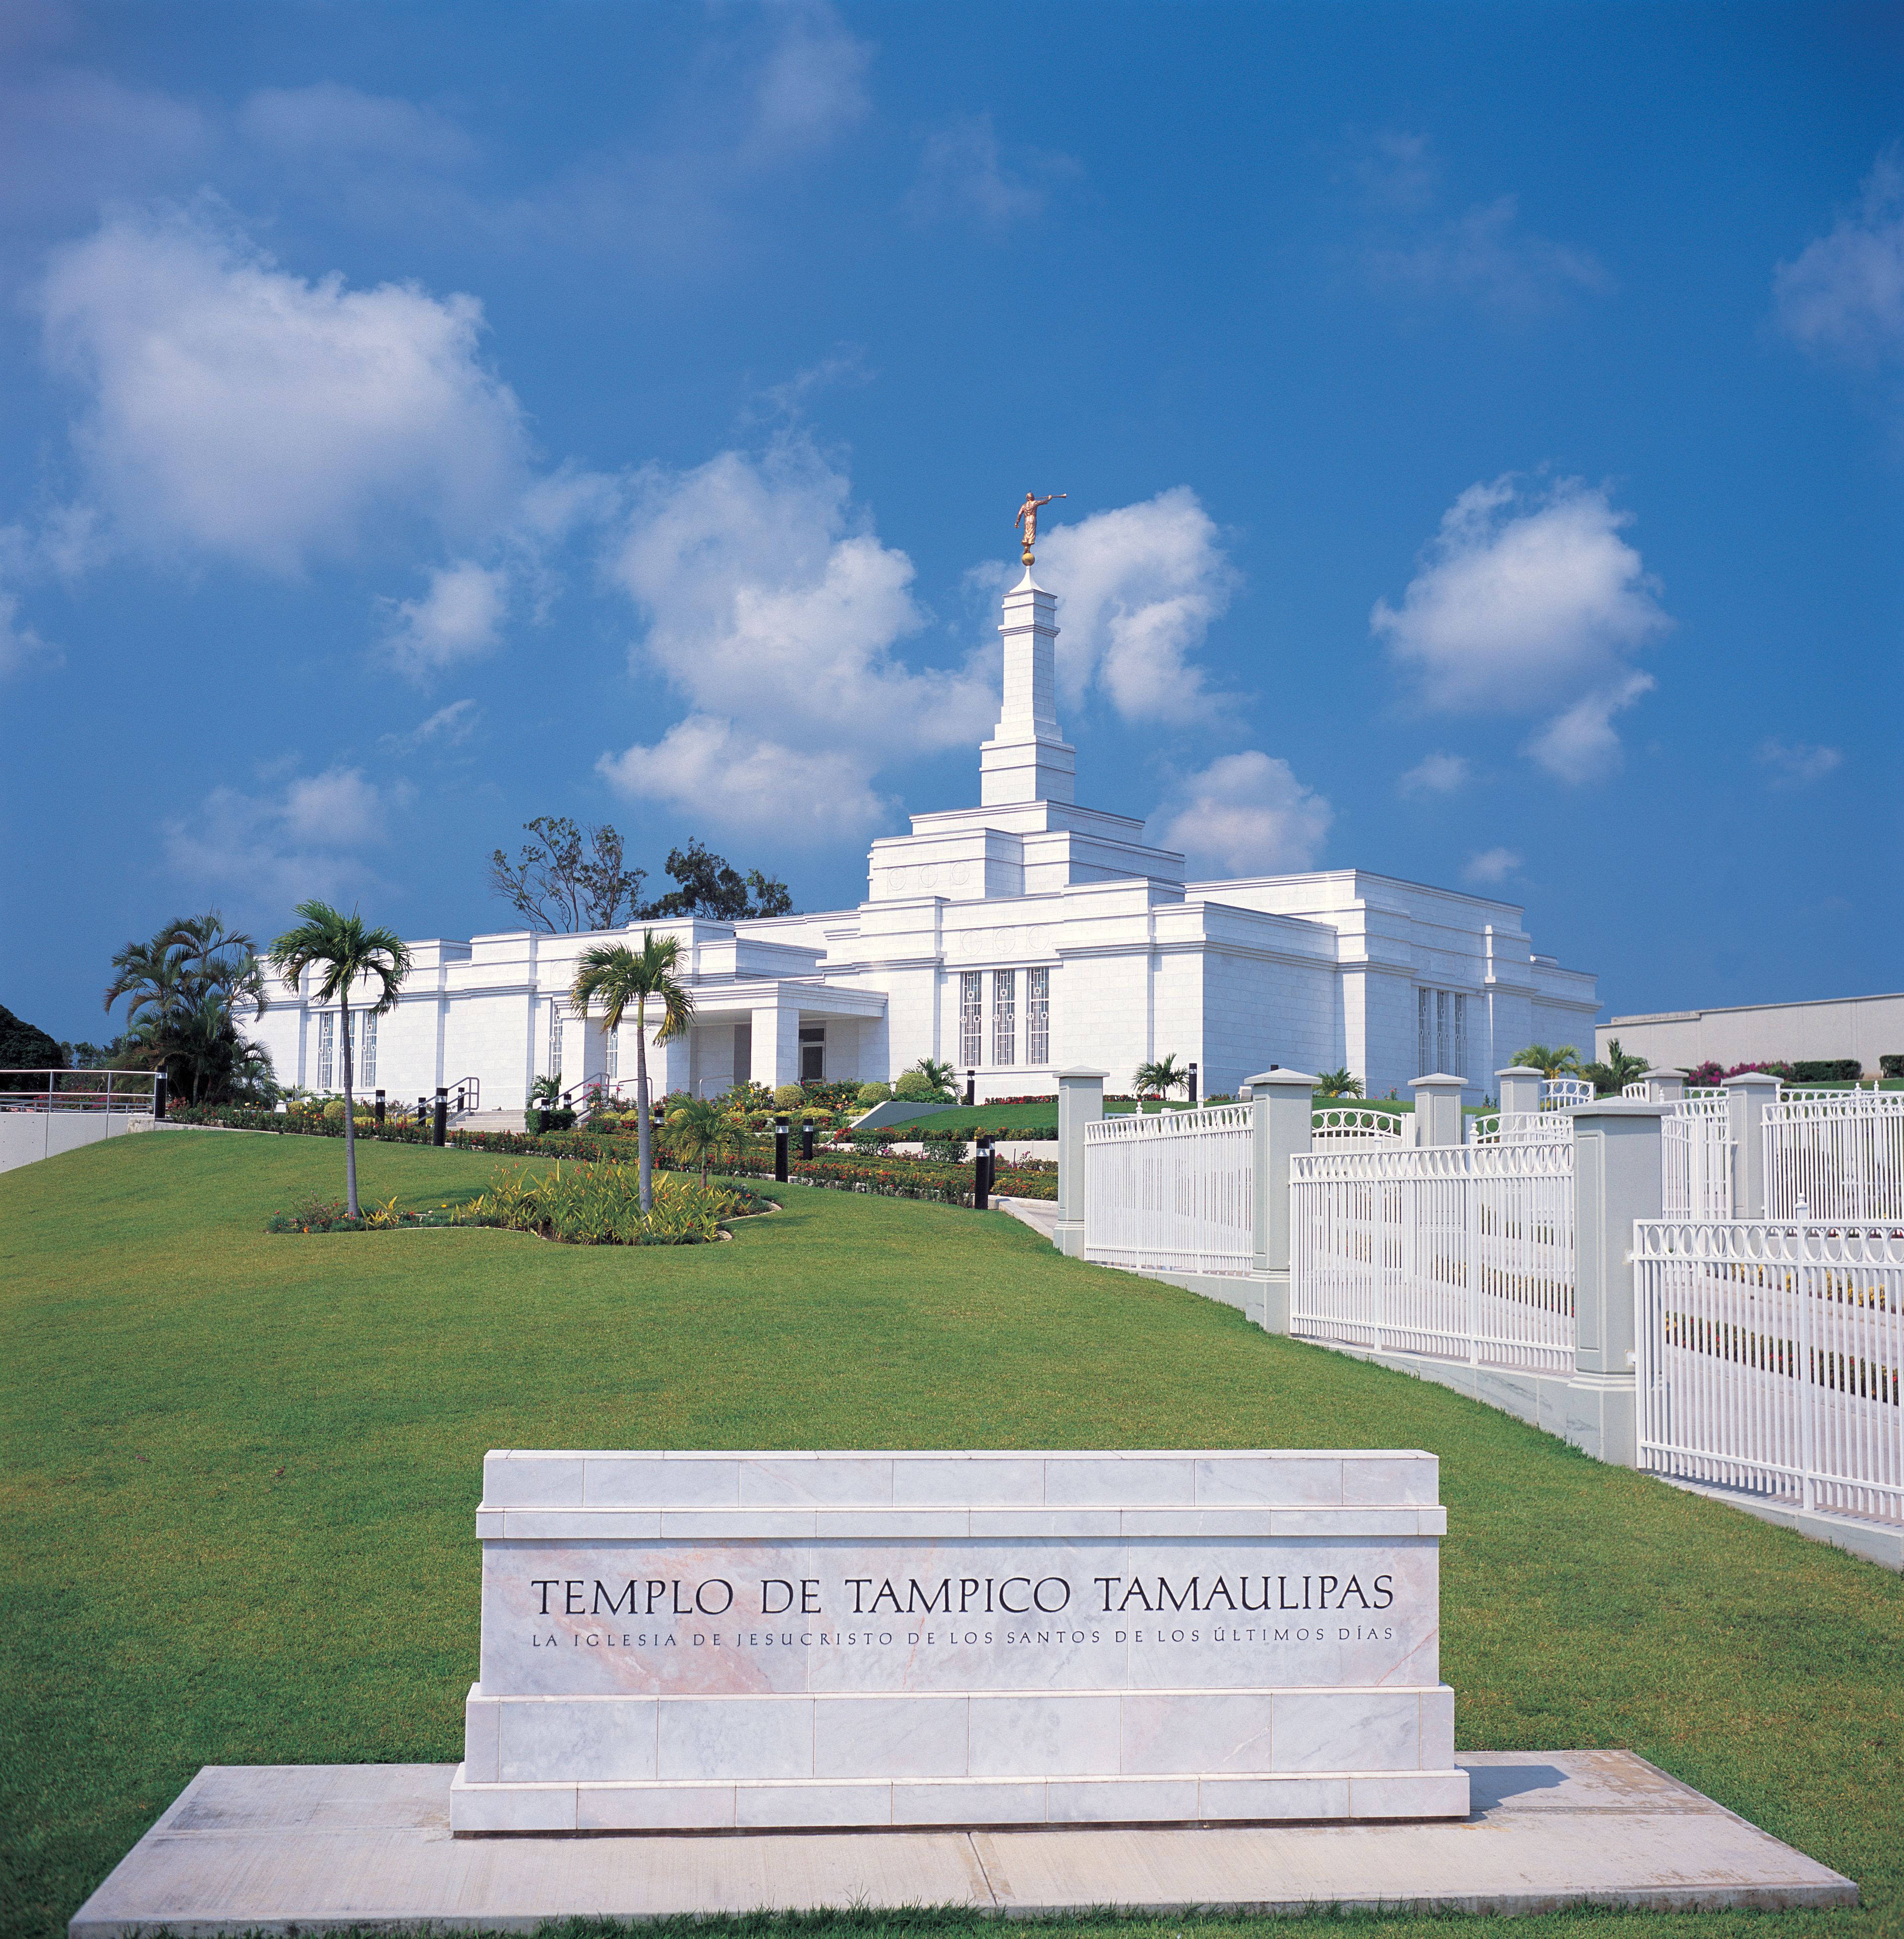 The Tampico Mexico Temple, including the name sign and scenery.